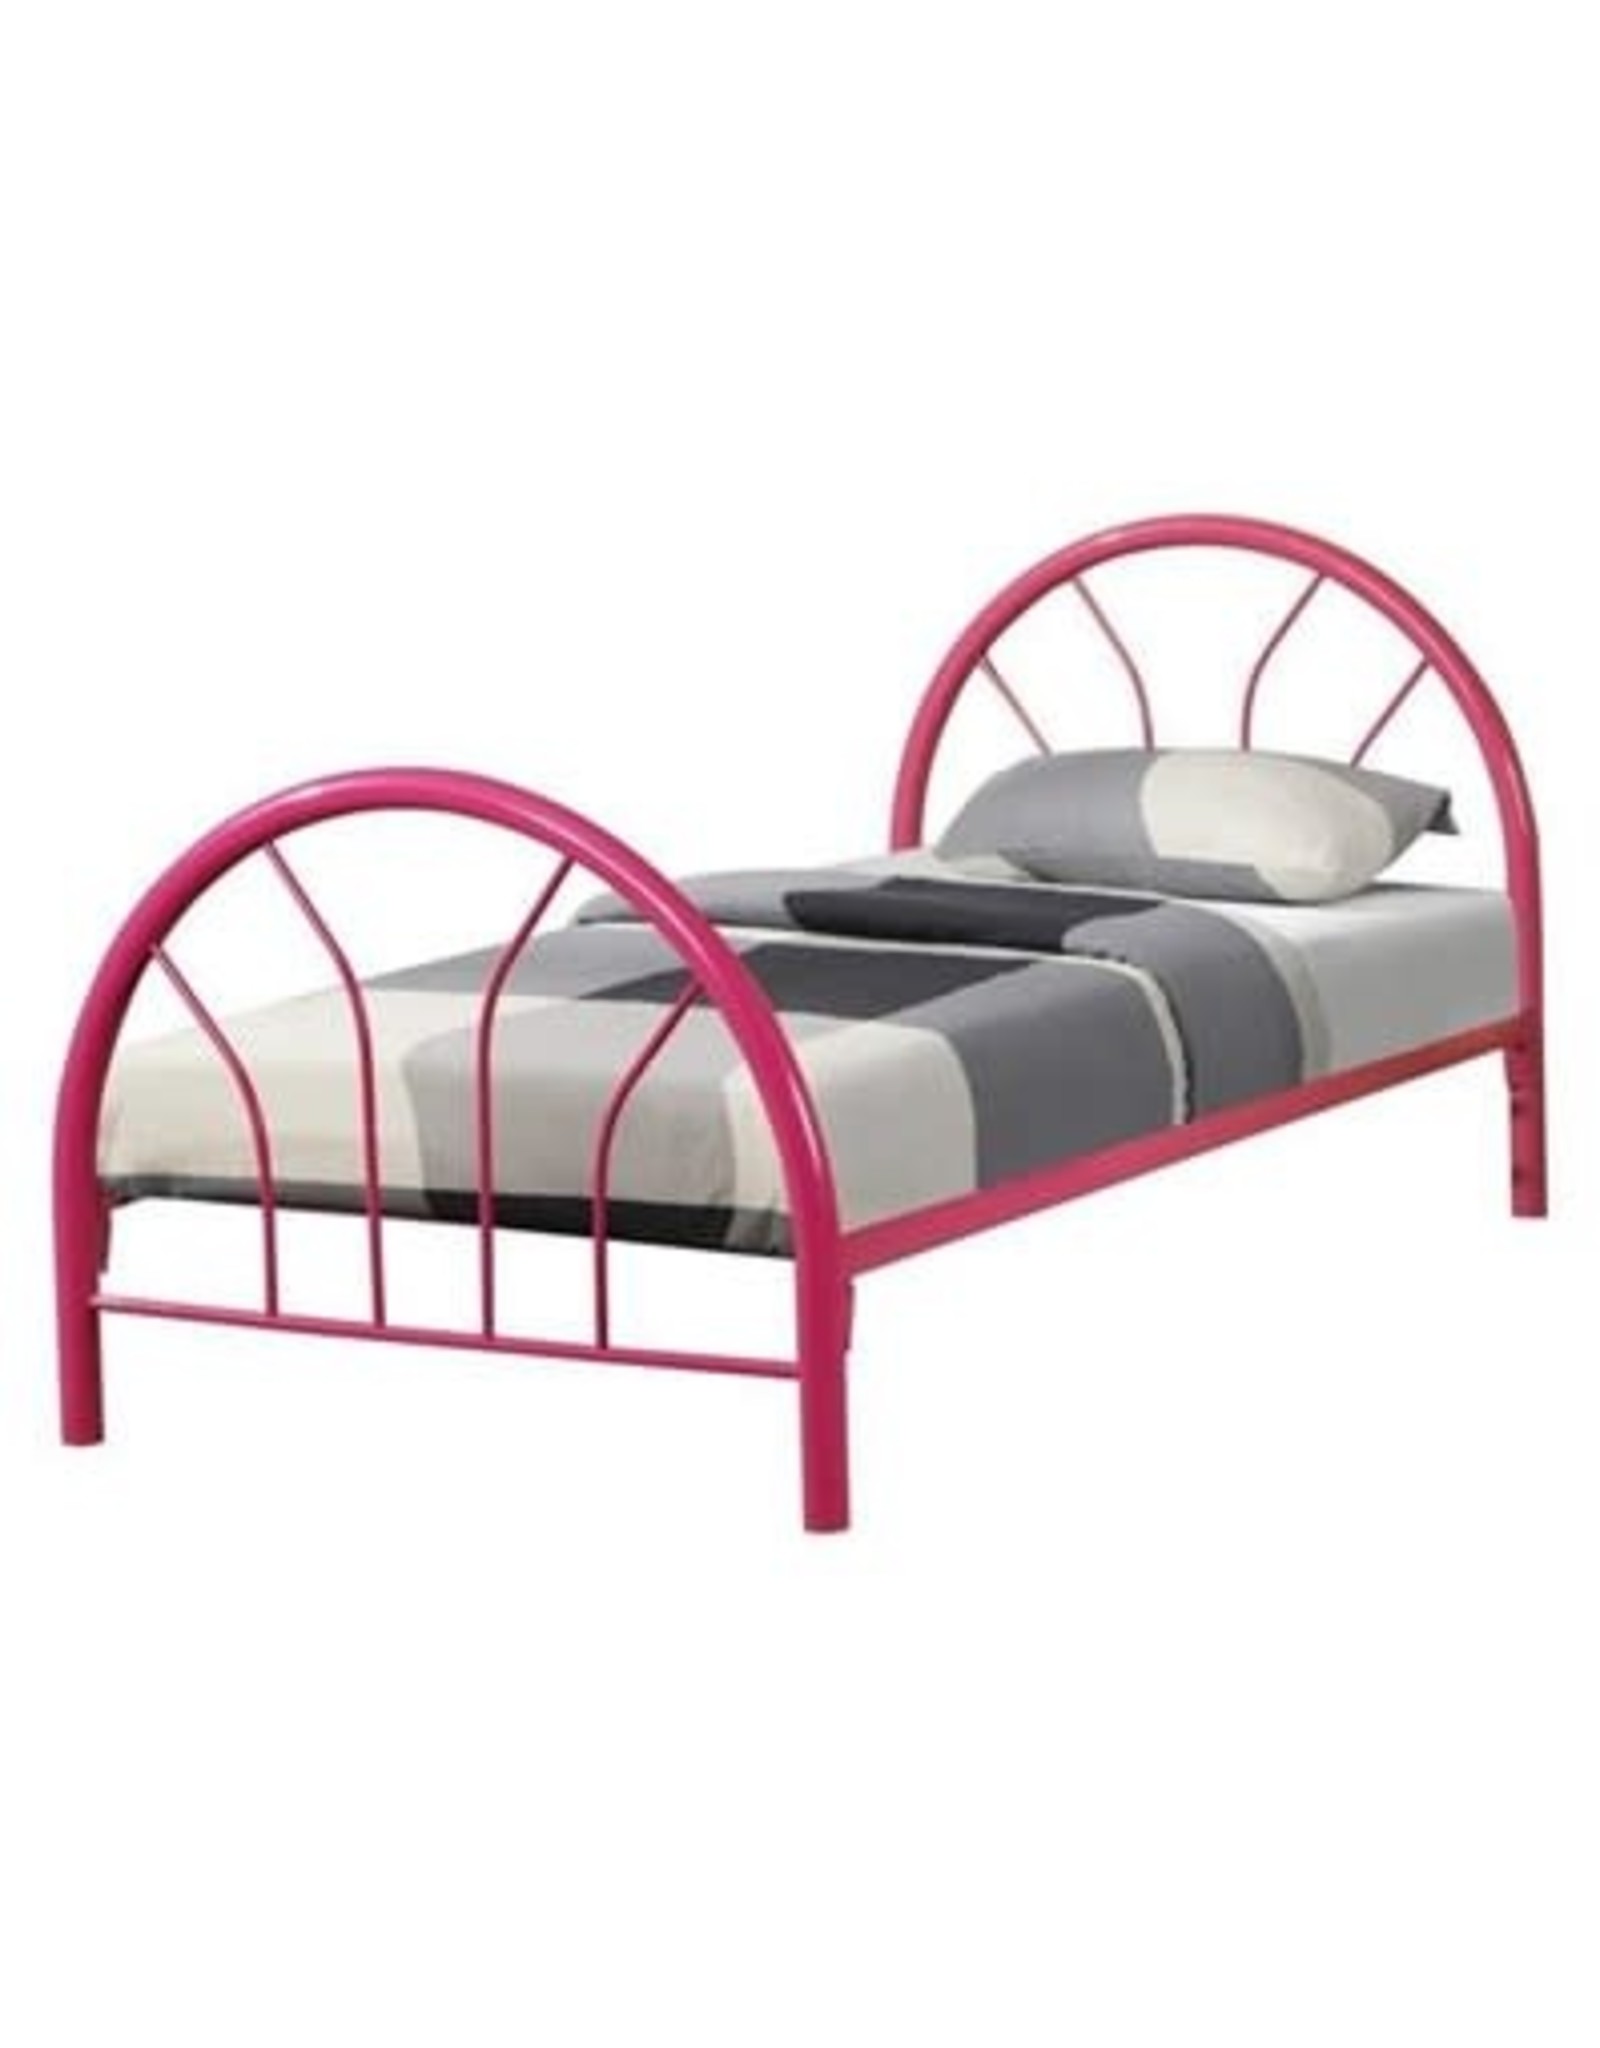 GR-215 PINK Twin Bed